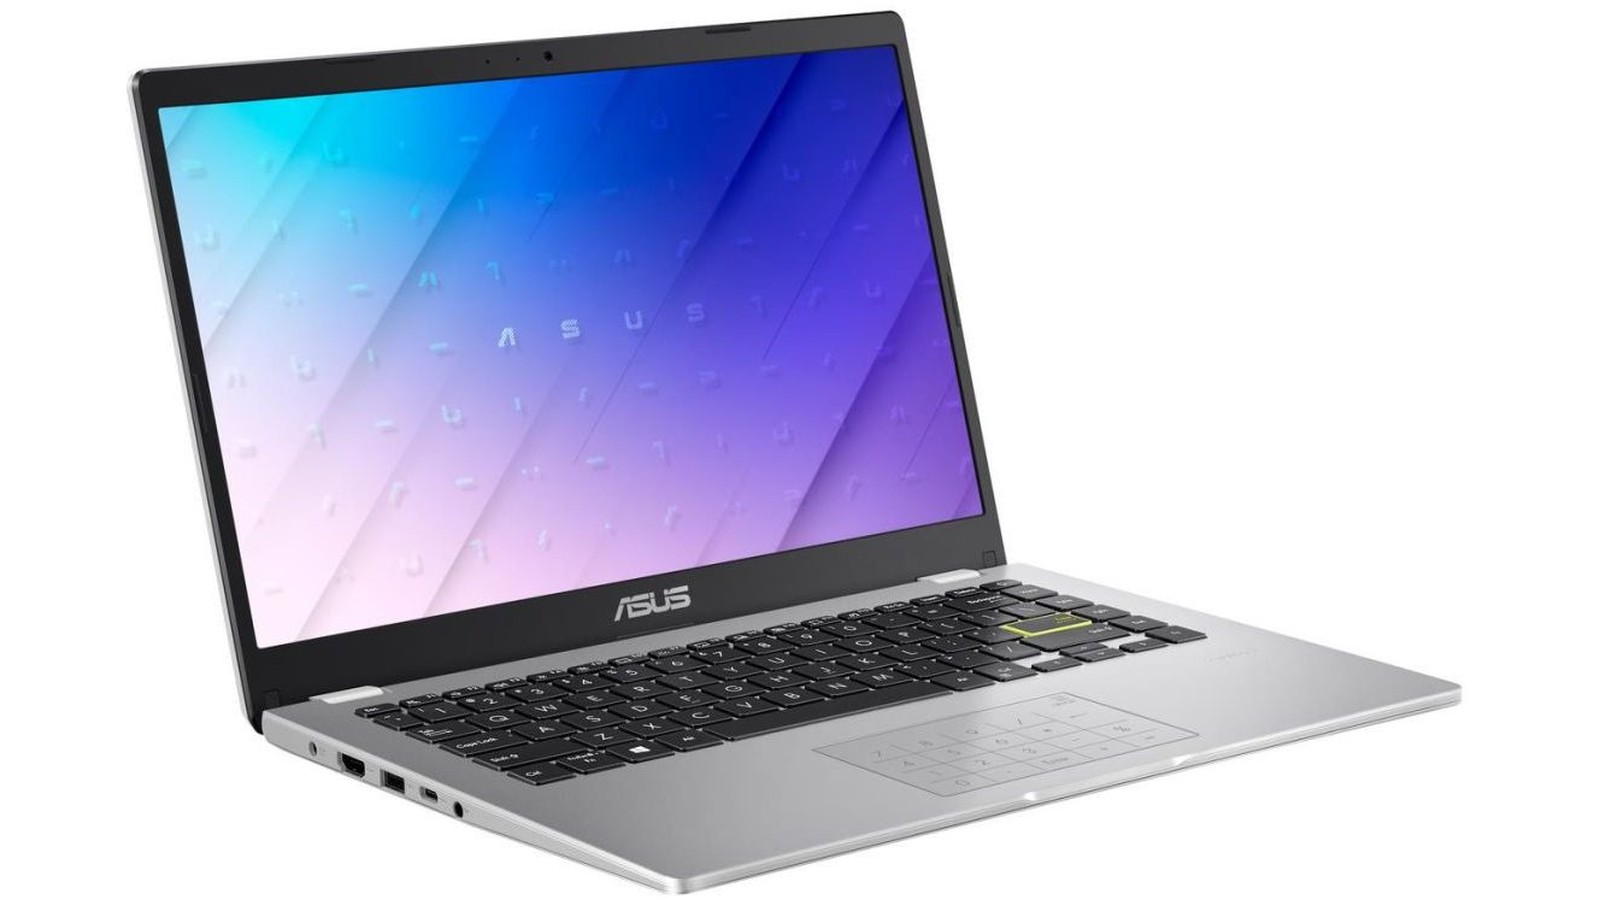 Asus laptops, PCs launch in India here's how you can watch it live